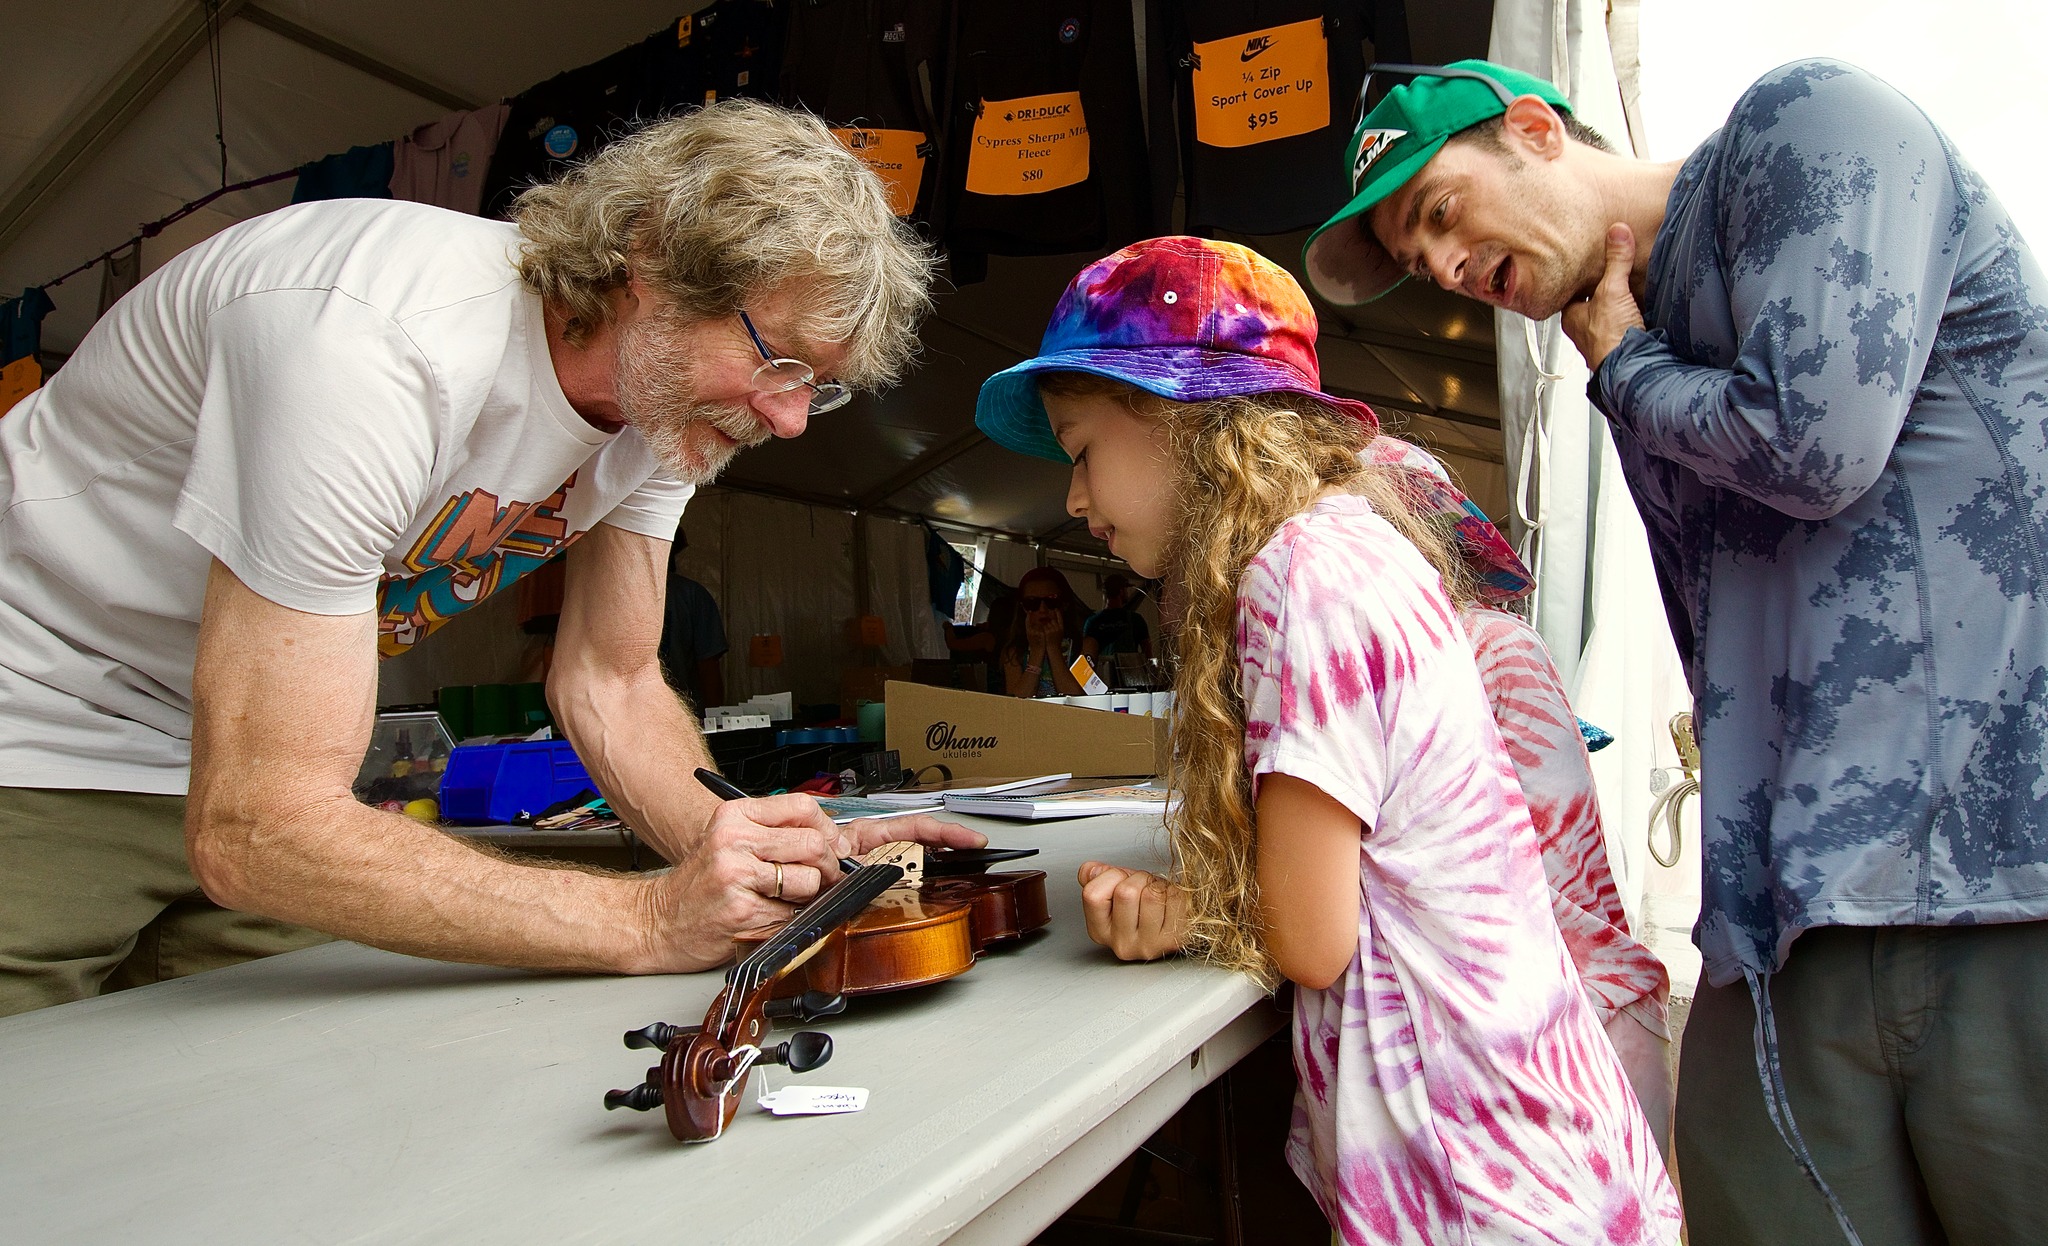 Sam Bush signing autographs for fans of all ages